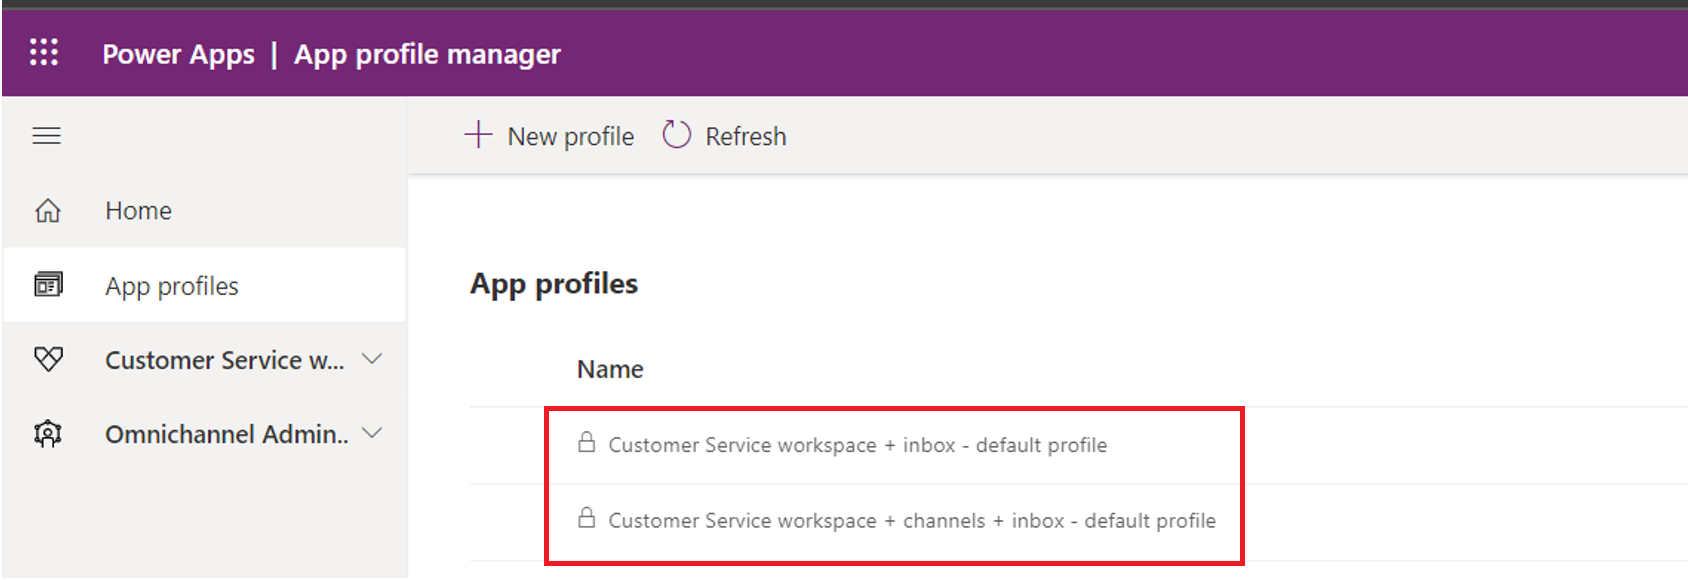 Select the profile for which to enable the inbox.